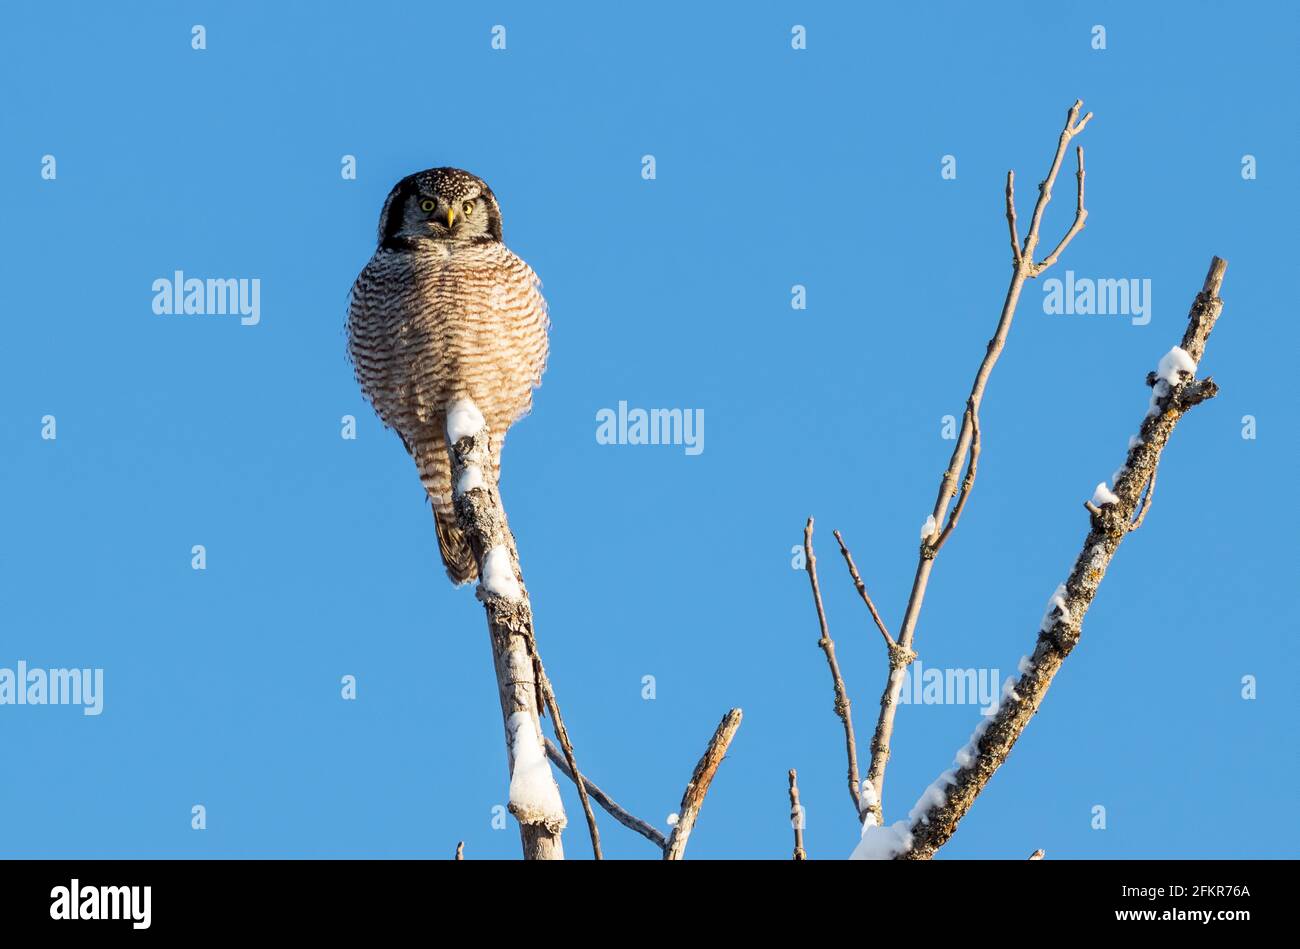 Northern hawk owl (Surnia ulula) perched on top of a tree in winter. The background is a clear sunny blue sky without a cloud in sight. Stock Photo